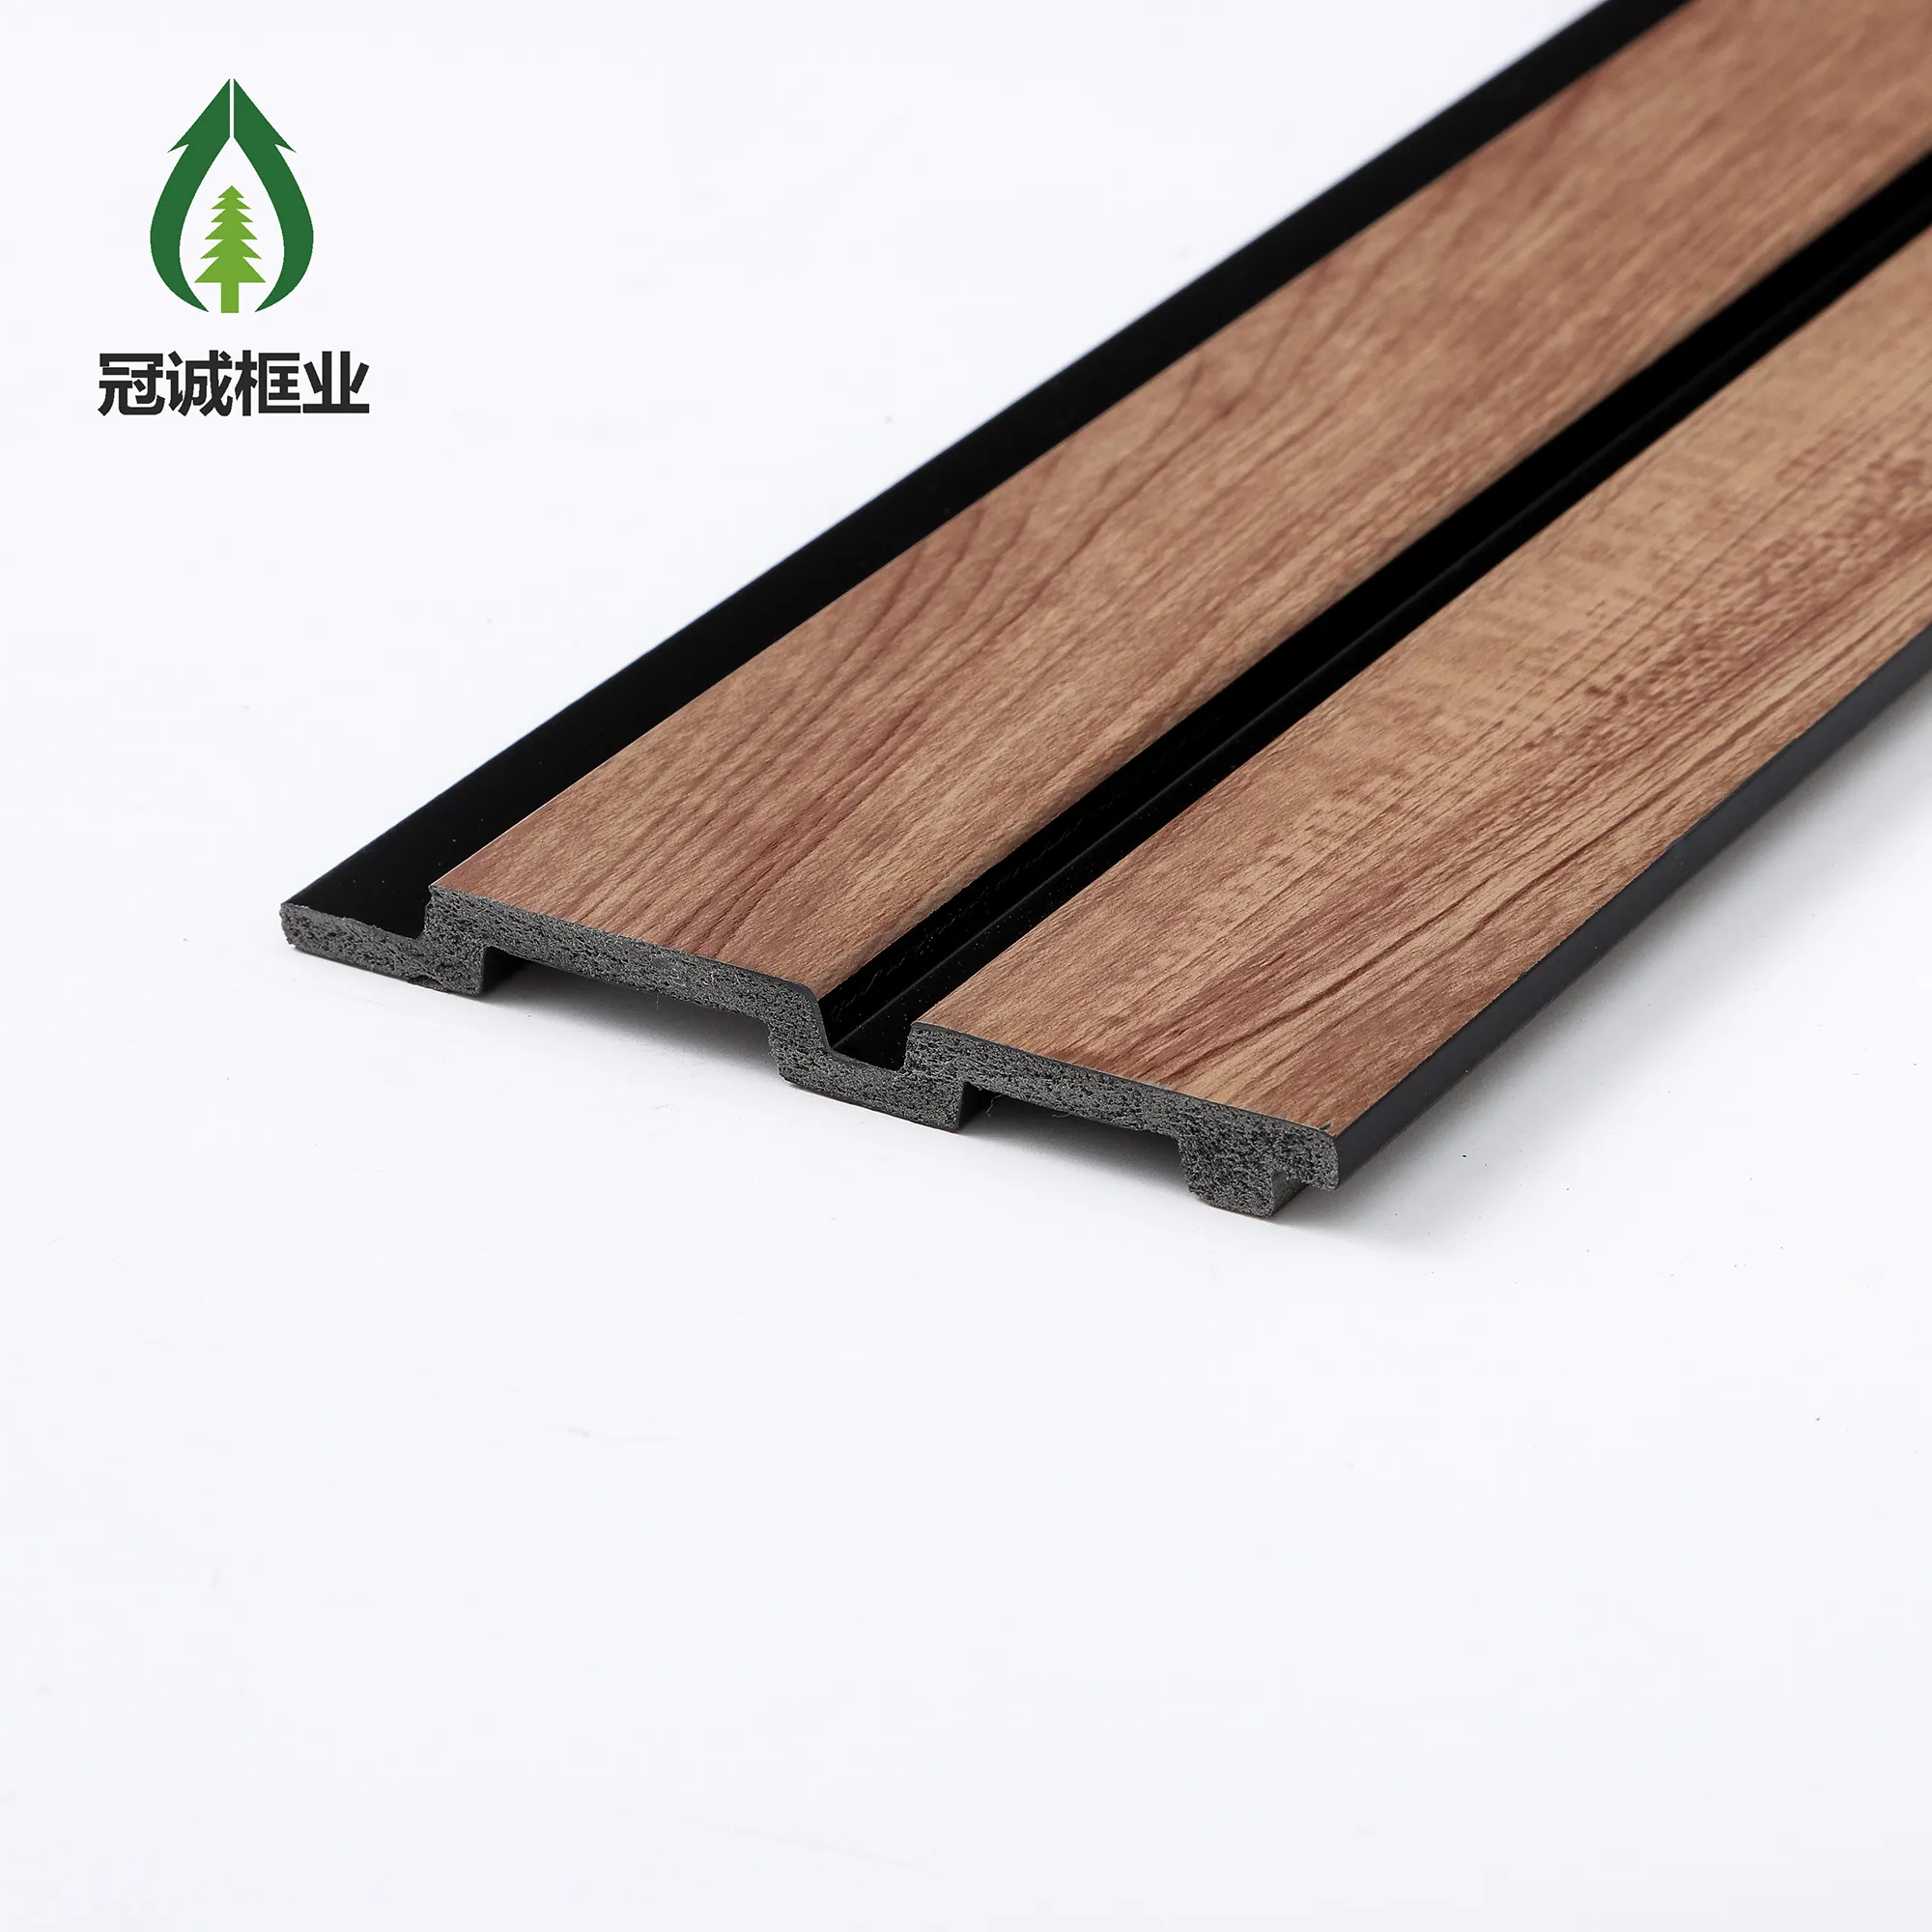 New Design Ps Wall Panel Ceiling Panel For Indoor And Outdoor Decorative Wood Panels For Walls For Home Interior